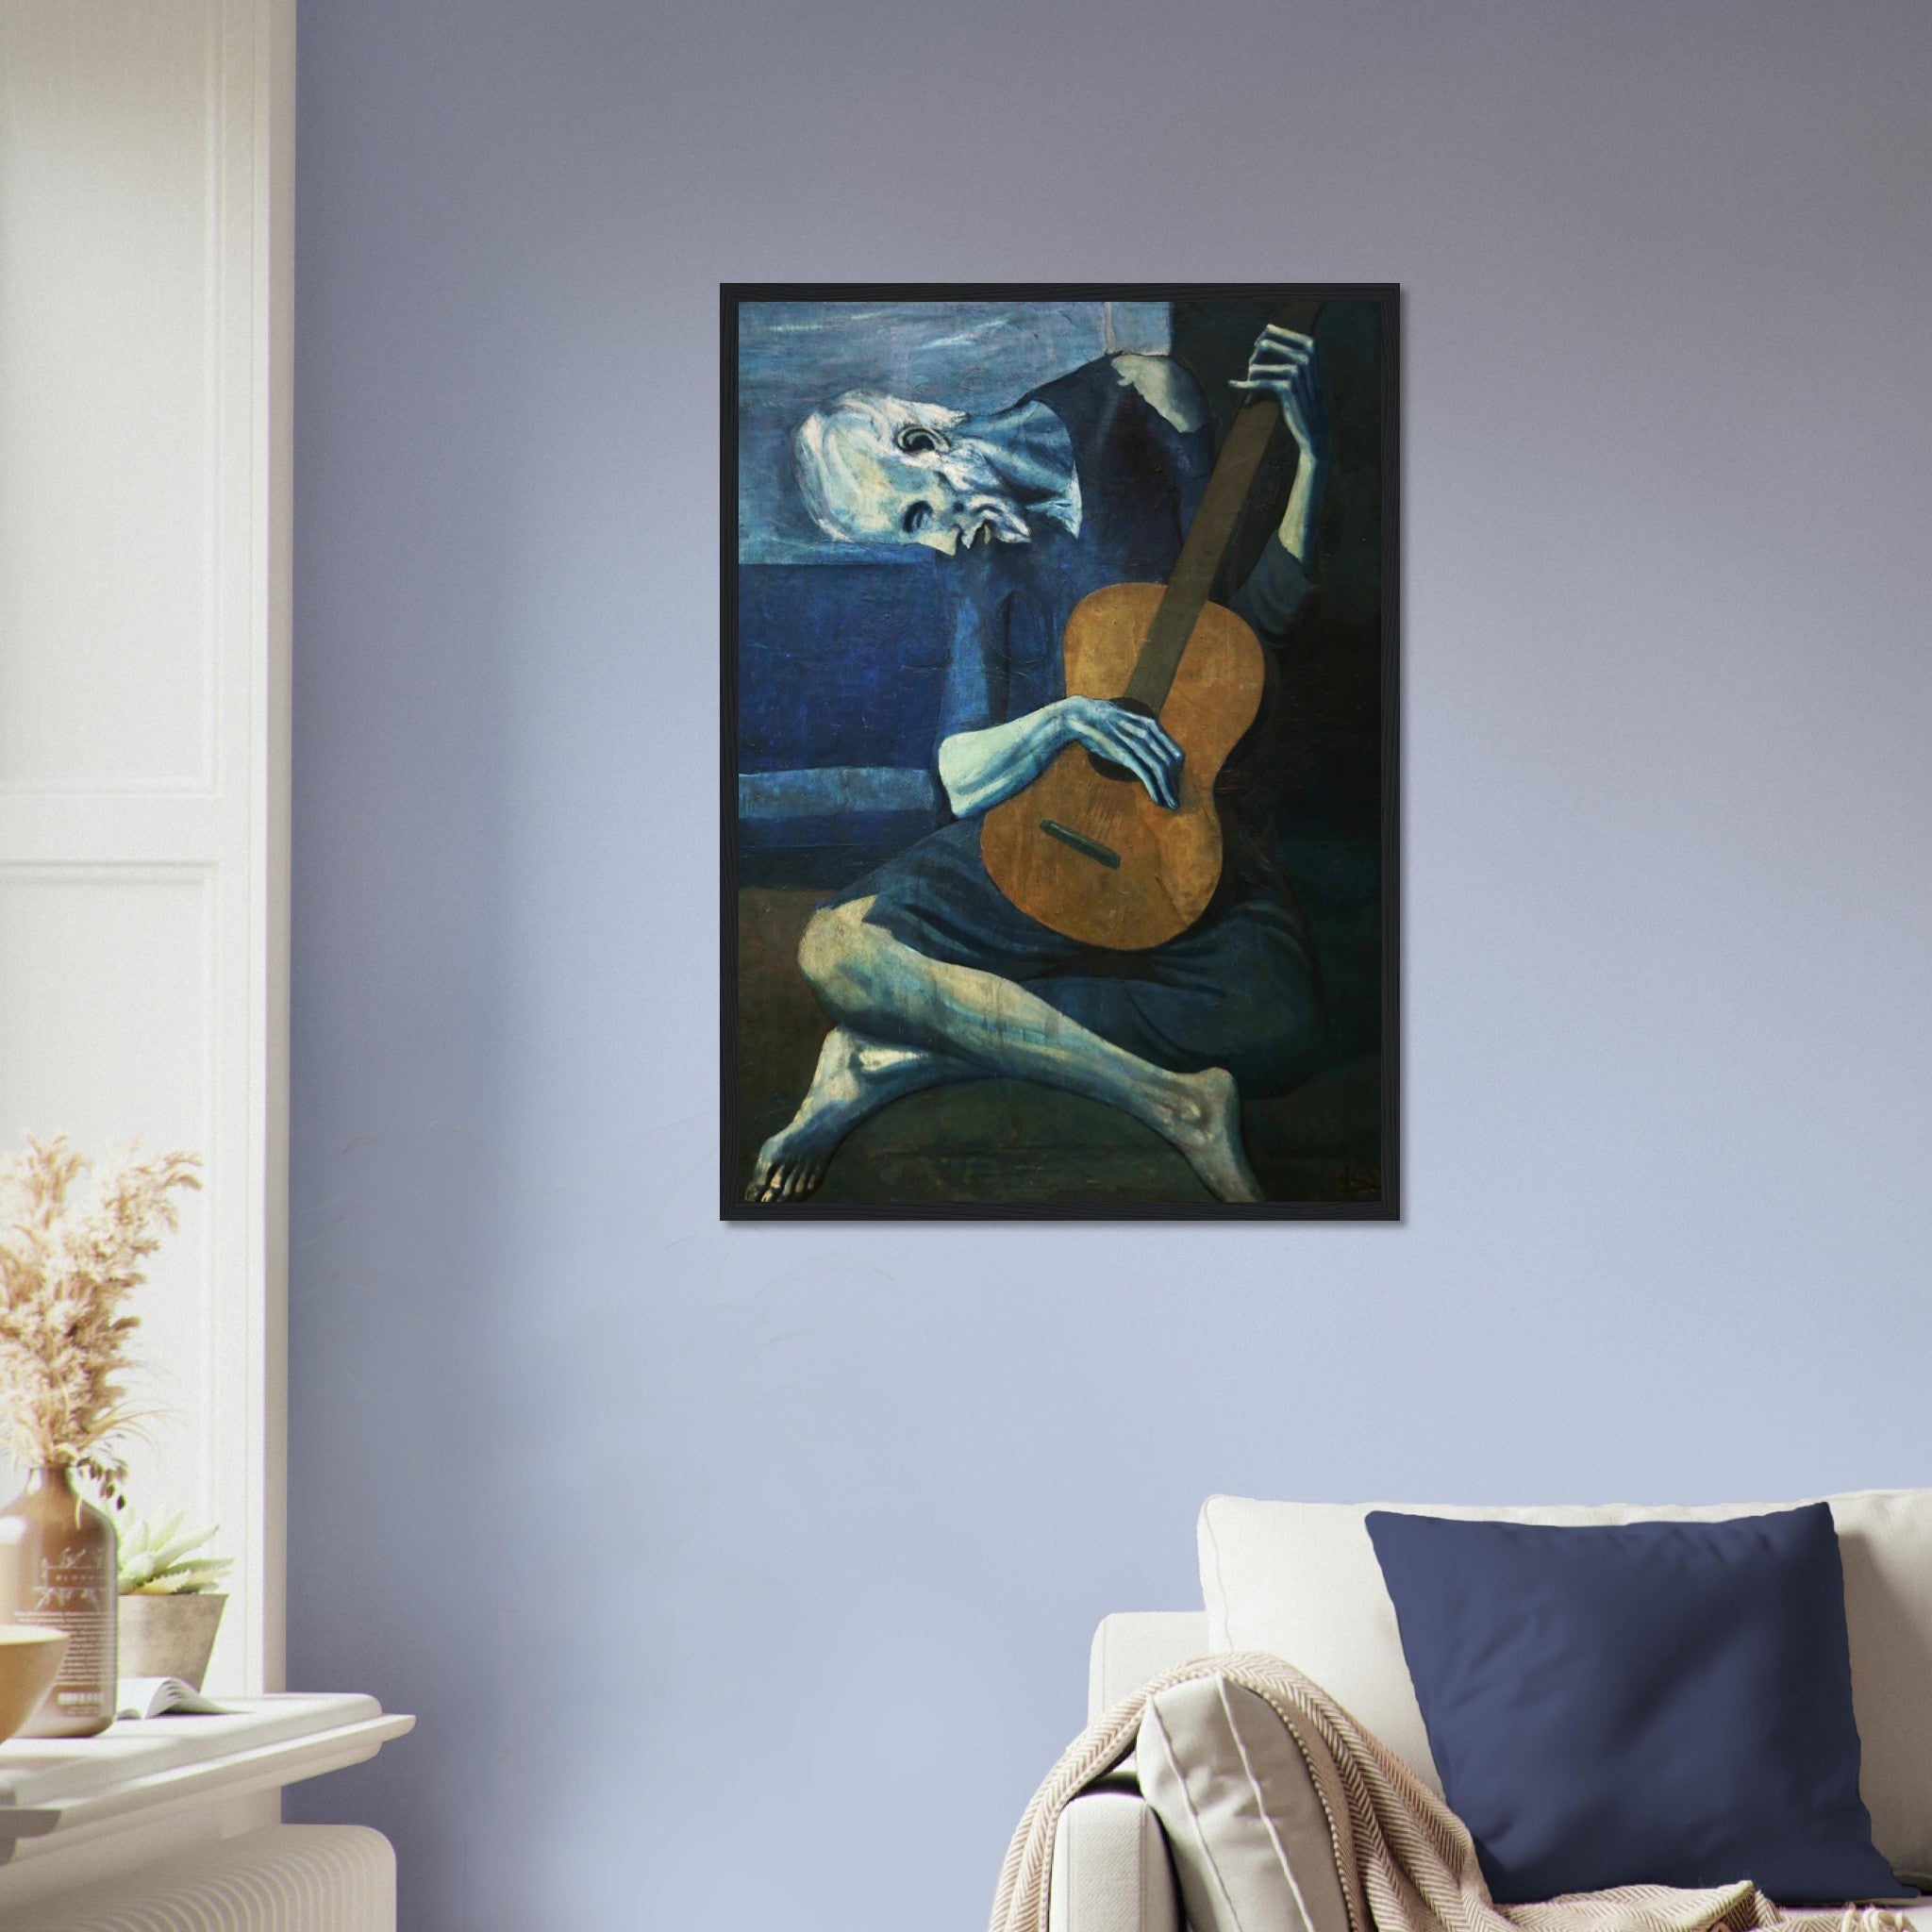 Picasso Framed Print, The Old Guitarist - Picasso Print, Pablo Picasso 1904 - WallArtPrints4U